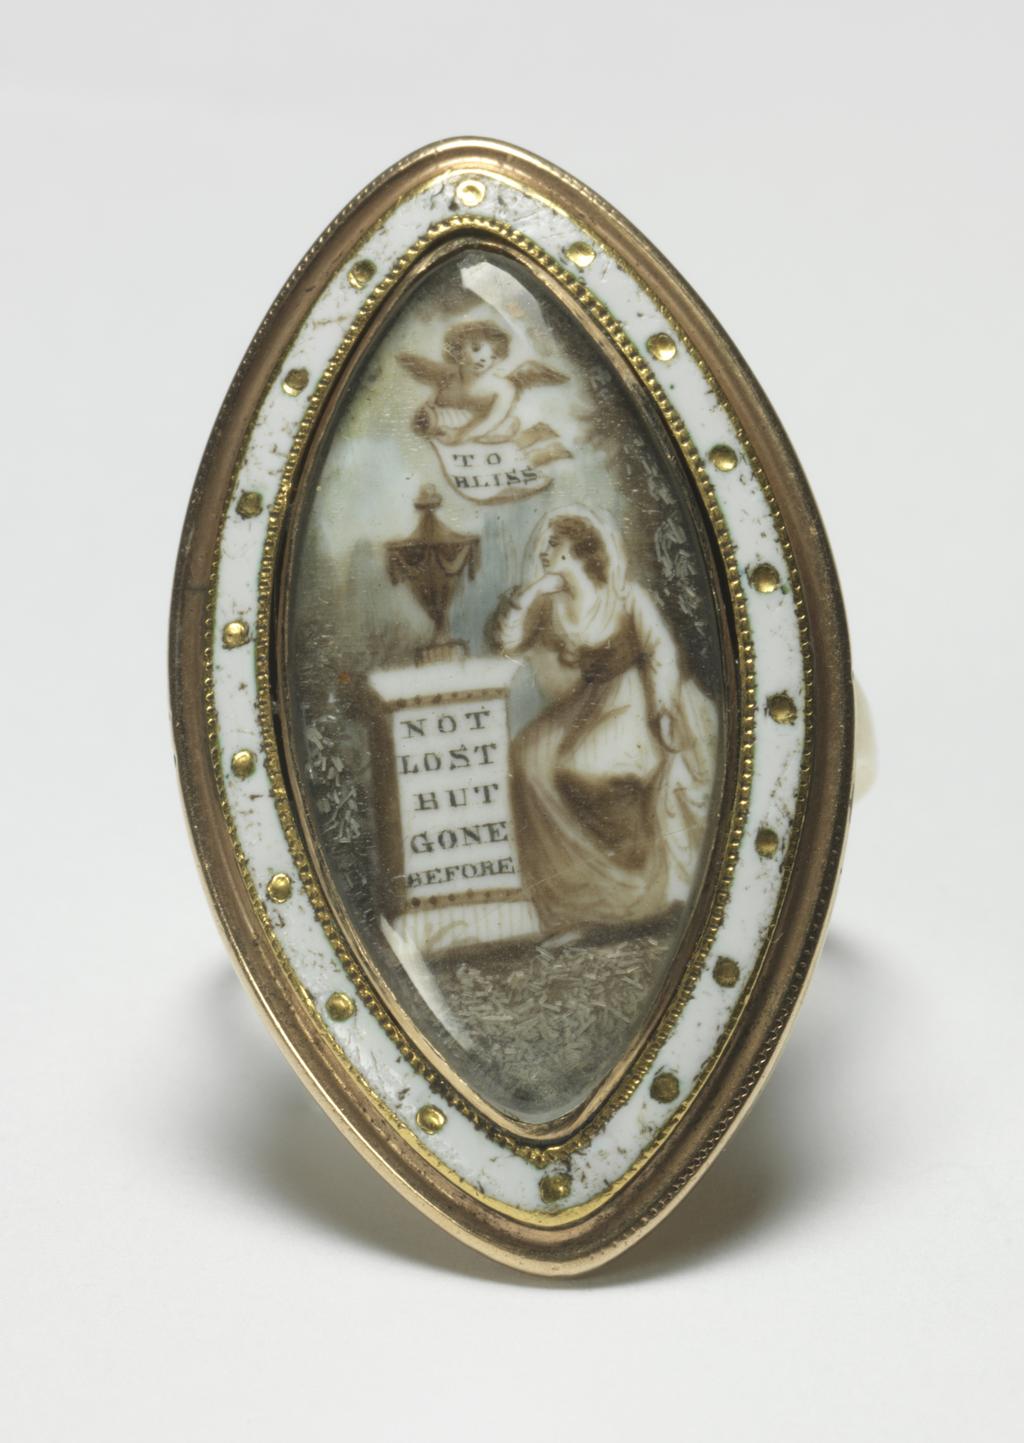 An image of Jewellery. Ring/Mourning Ring. Thin, narrow hoop expanding at the shoulders. Marquise shaped bezel with enamel border, gold dots reserved in white enamel. Under glass a painting on ivory of a woman seated by an urn, which is on a pedestal bearing the inscription: 'NOT LOST BUT GONE BEFORE'. Above the pedestal a cherub holds a scroll inscribed: 'TO BLISS'. On the back of the bezel is the inscription: 'Garsford Gibbs Obt 25 Dec 1788 aet 15'. Height, whole, 1.25 mm, depth, whole, 1.0 mm, length, whole, 20.5 mm, height, bezel (marquise) 4.5 mm, width, bezel (marquise) 19.0 mm, length, bezel (marquise) 33.5 mm, 1788. English.